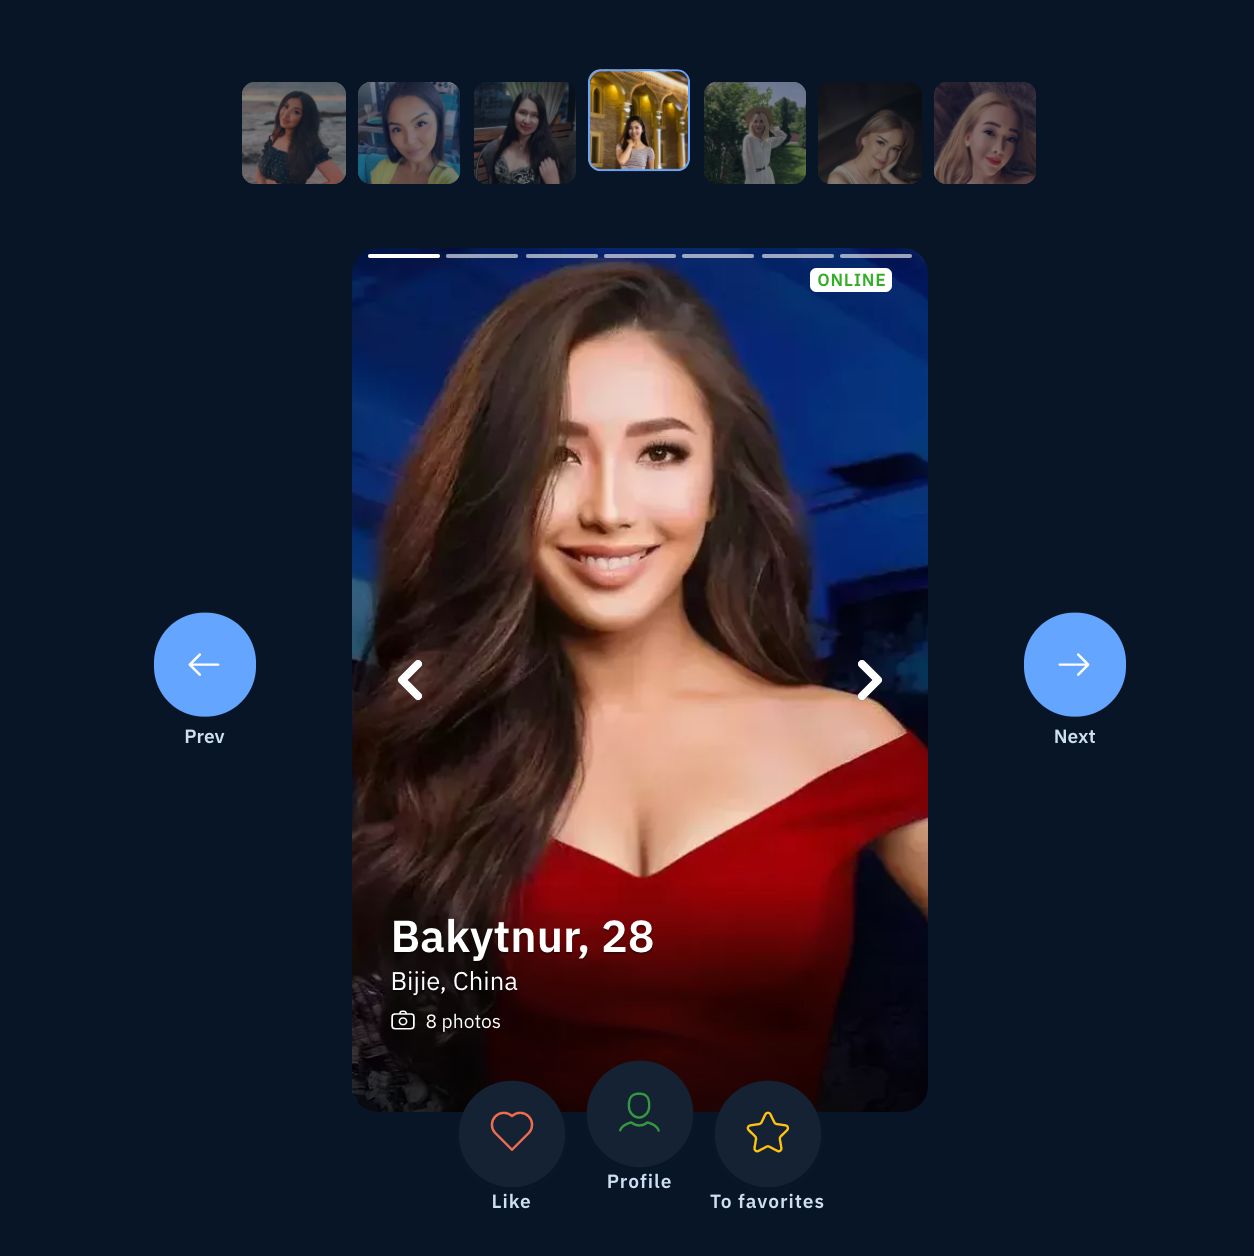 TheLuckyDate — best for those who like Tinder